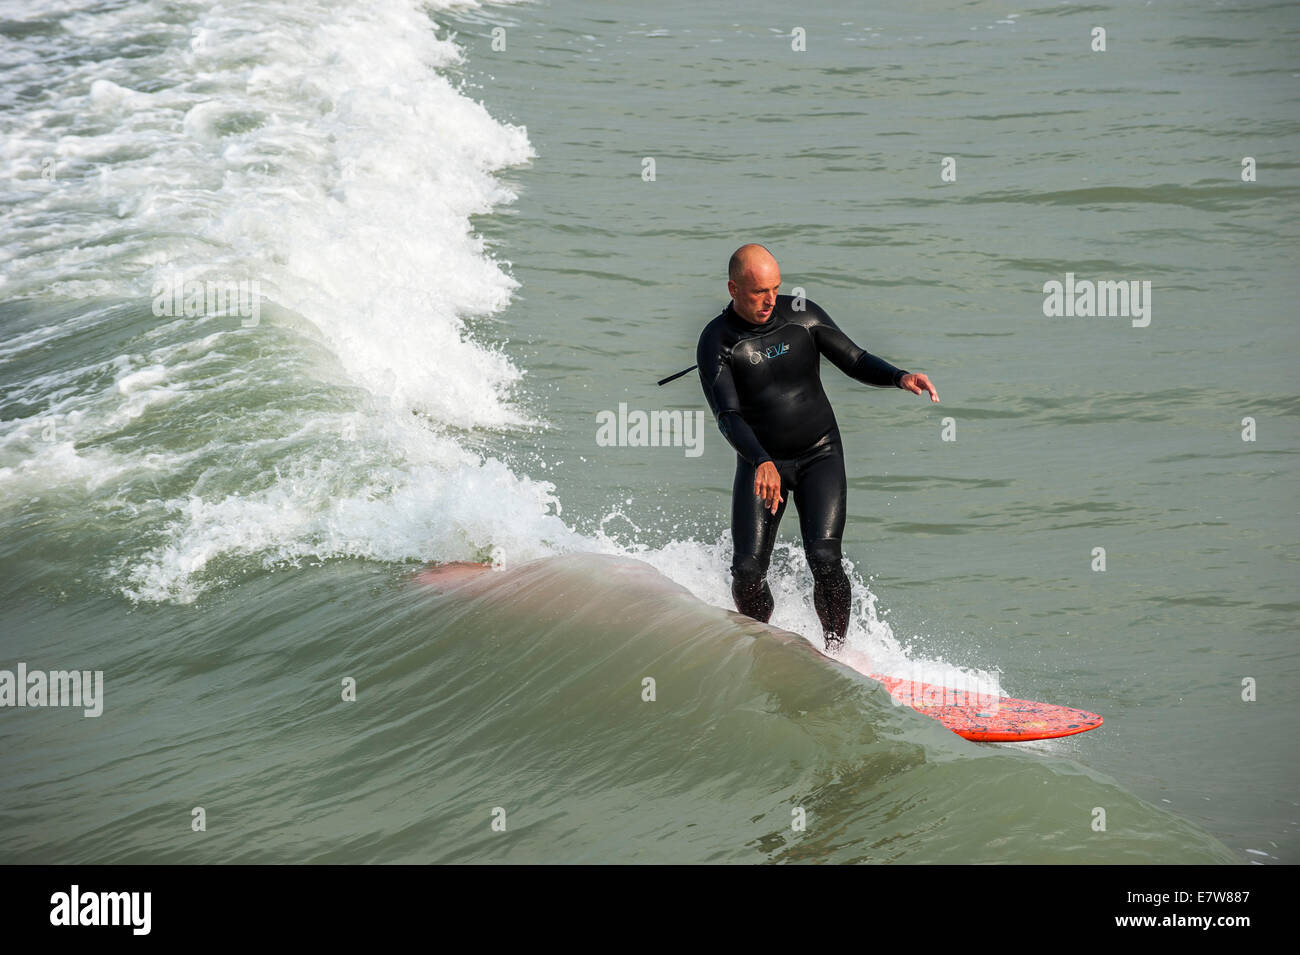 Middle-aged surfer in black wetsuit riding wave on surfboard as it breaks along the North Sea coast Stock Photo